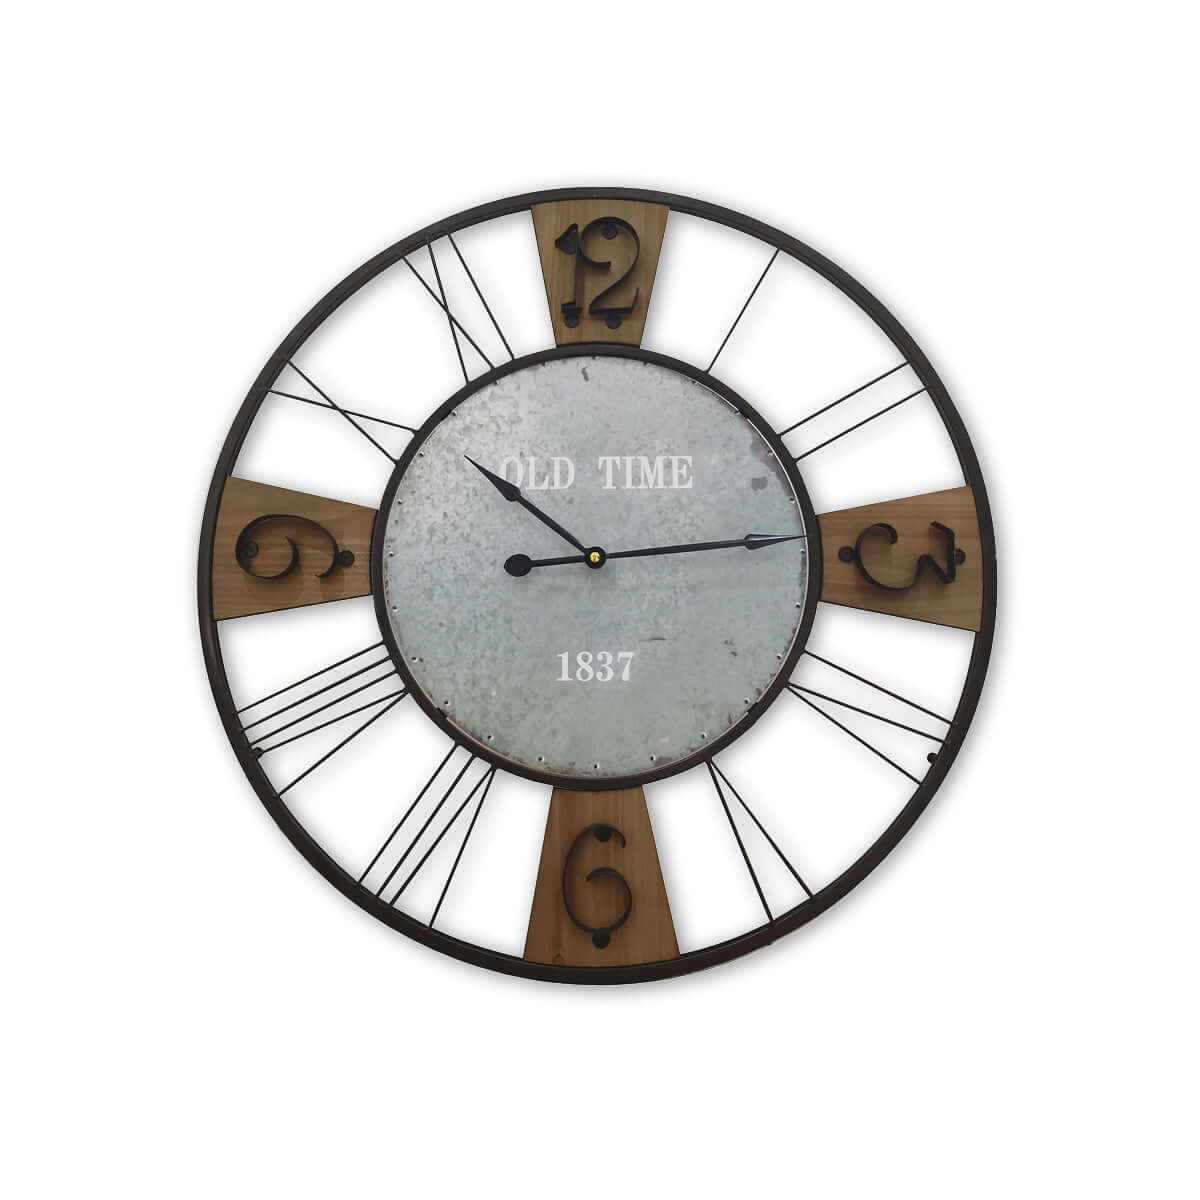 Home Master Wall Clock Large Vintage Design Stylish Metal Accents 60cm-Upinteriors